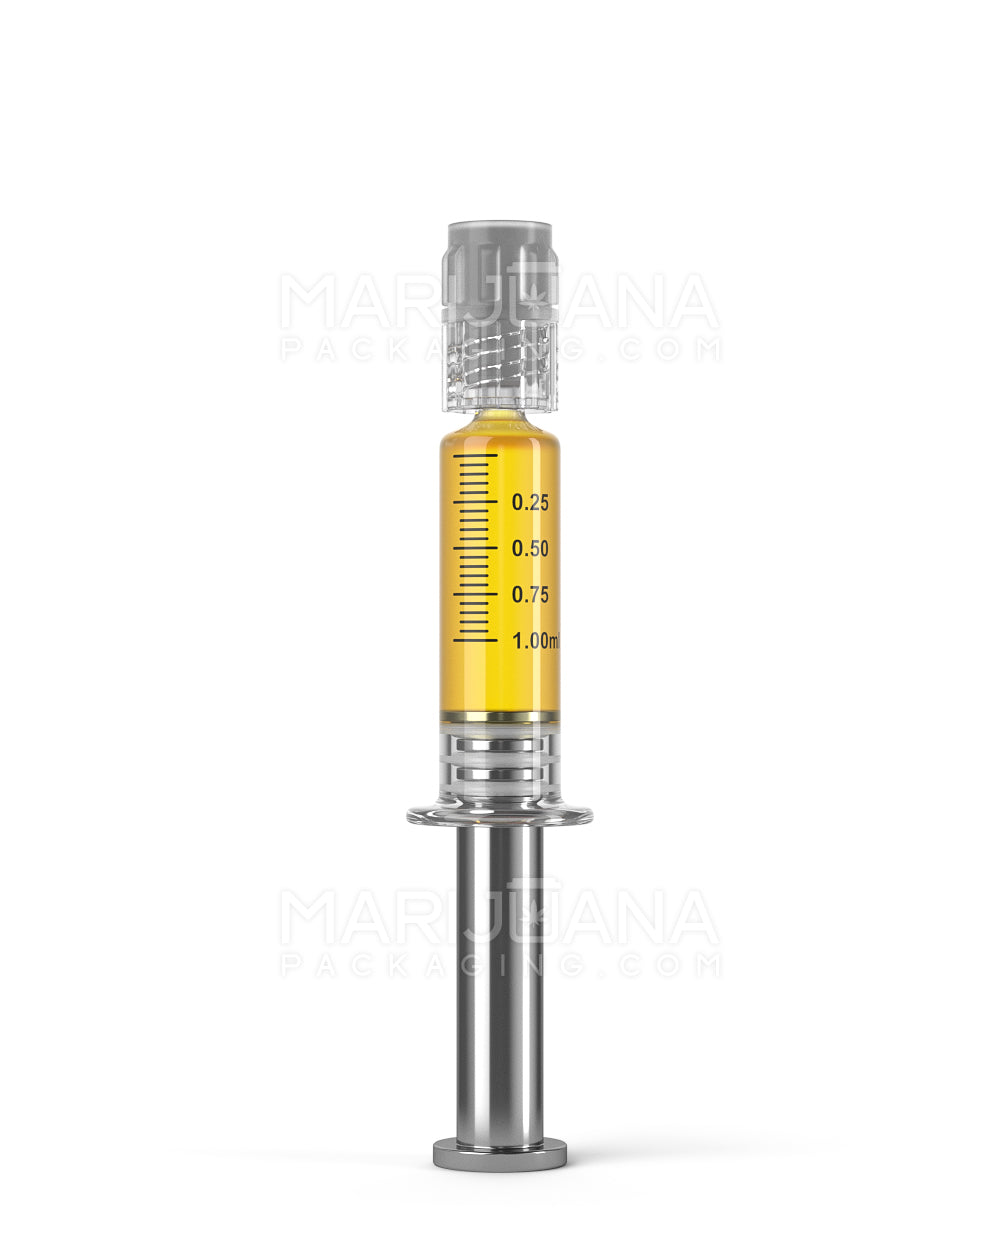 Luer Lock | Glass Dab Applicator Syringes w/ Metal Plunger | 1mL - 0.25mL Increments - 100 Count - 2